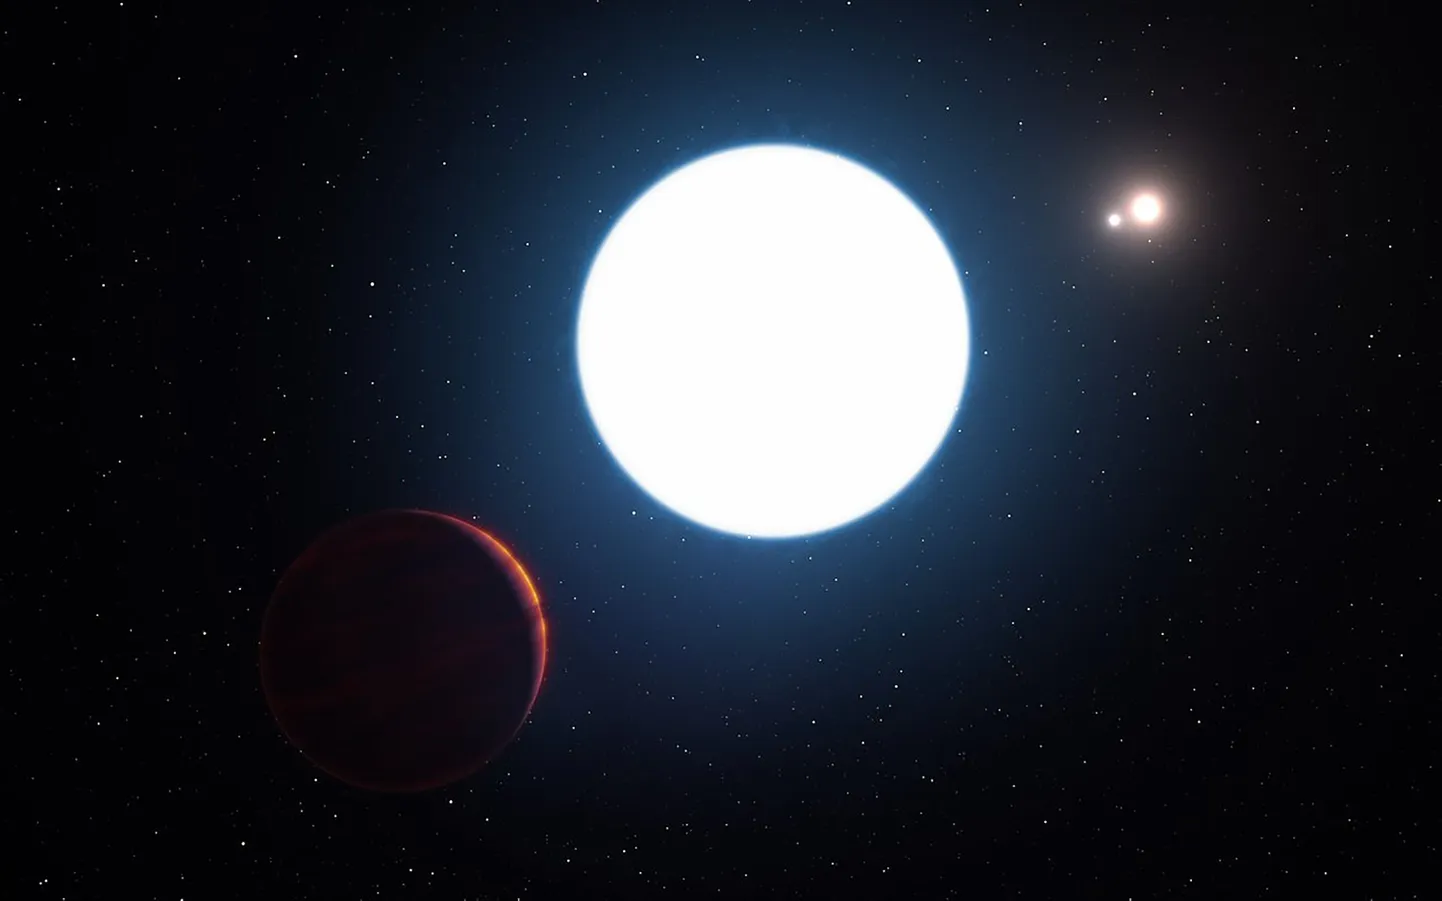 This  artist's impression released by the European Southern Observatory on July 7, 2016, shows a view of the triple star system HD 131399 from close to the giant planet orbiting in the system. The planet is known as HD 131399Ab and appears at the lower-left of the picture. 
Located about 320 light-years from Earth in the constellation of Centaurus, HD 131399Ab is about 16 million years old, making it also one of the youngest exoplanets discovered to date, and one of very few directly-imaged planets.  / AFP PHOTO / EUROPEAN SOUTHERN OBSERVATORY / L. Calcada / RESTRICTED TO EDITORIAL USE - MANDATORY CREDIT "AFP PHOTO / European Southern Observatory / L. Cal